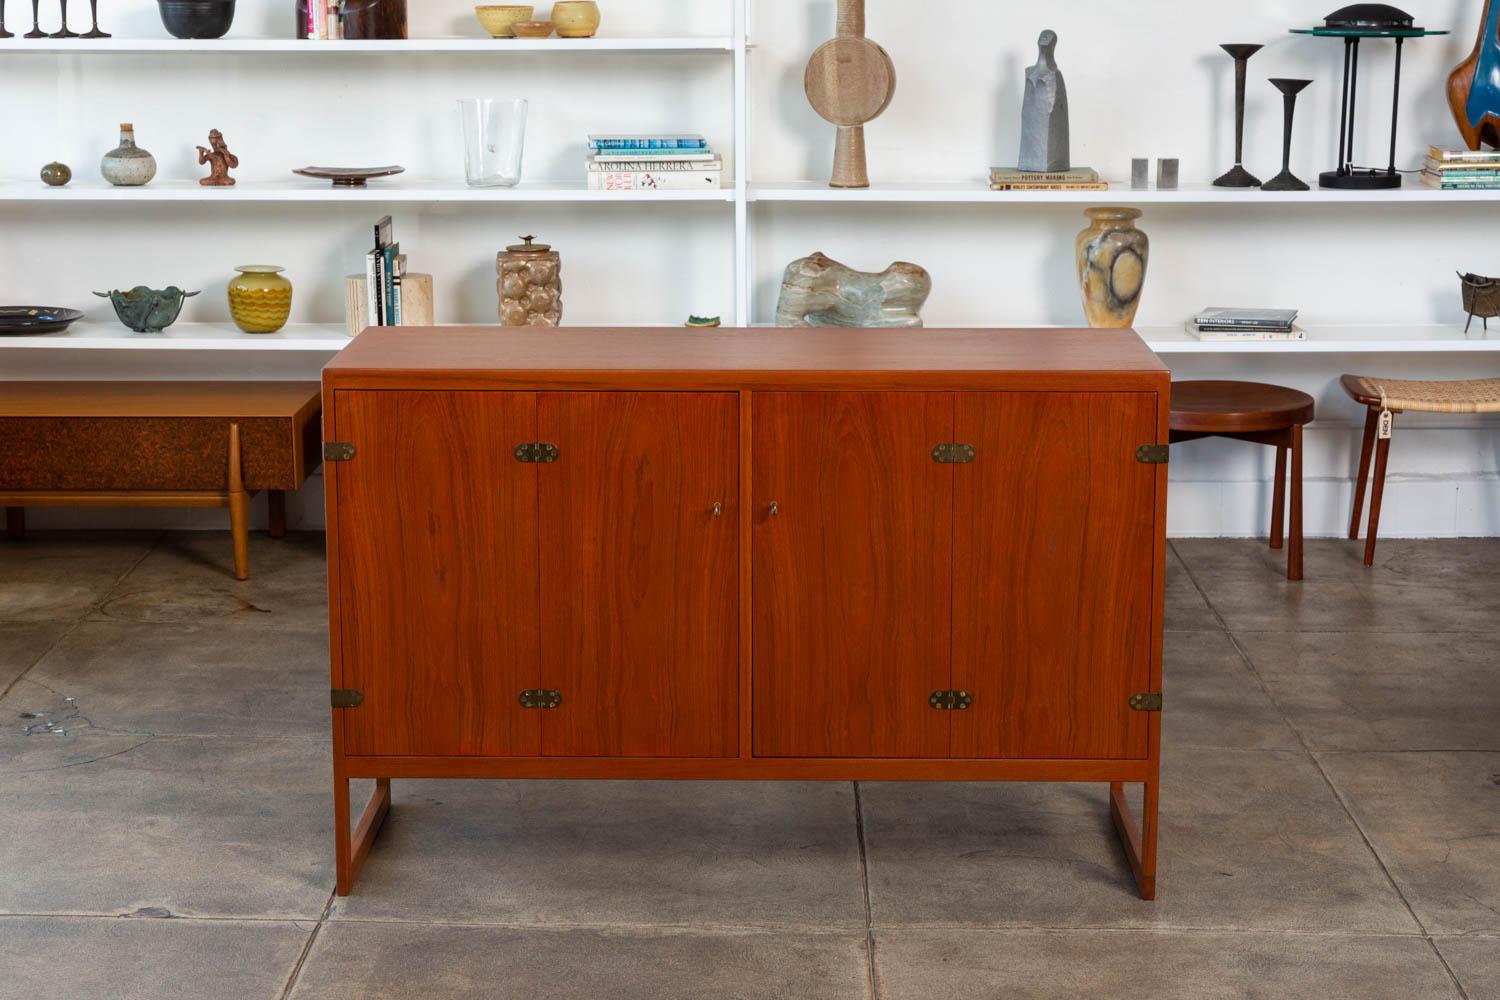 Børge Mogensen teak cabinet for Aalborg, Denmark, circa 1950s. The cabinet features a teak exterior frame and legs with white oak interior, patinated bronze hardware and folding door openings with adjustable shelving and drawers.

Condition: